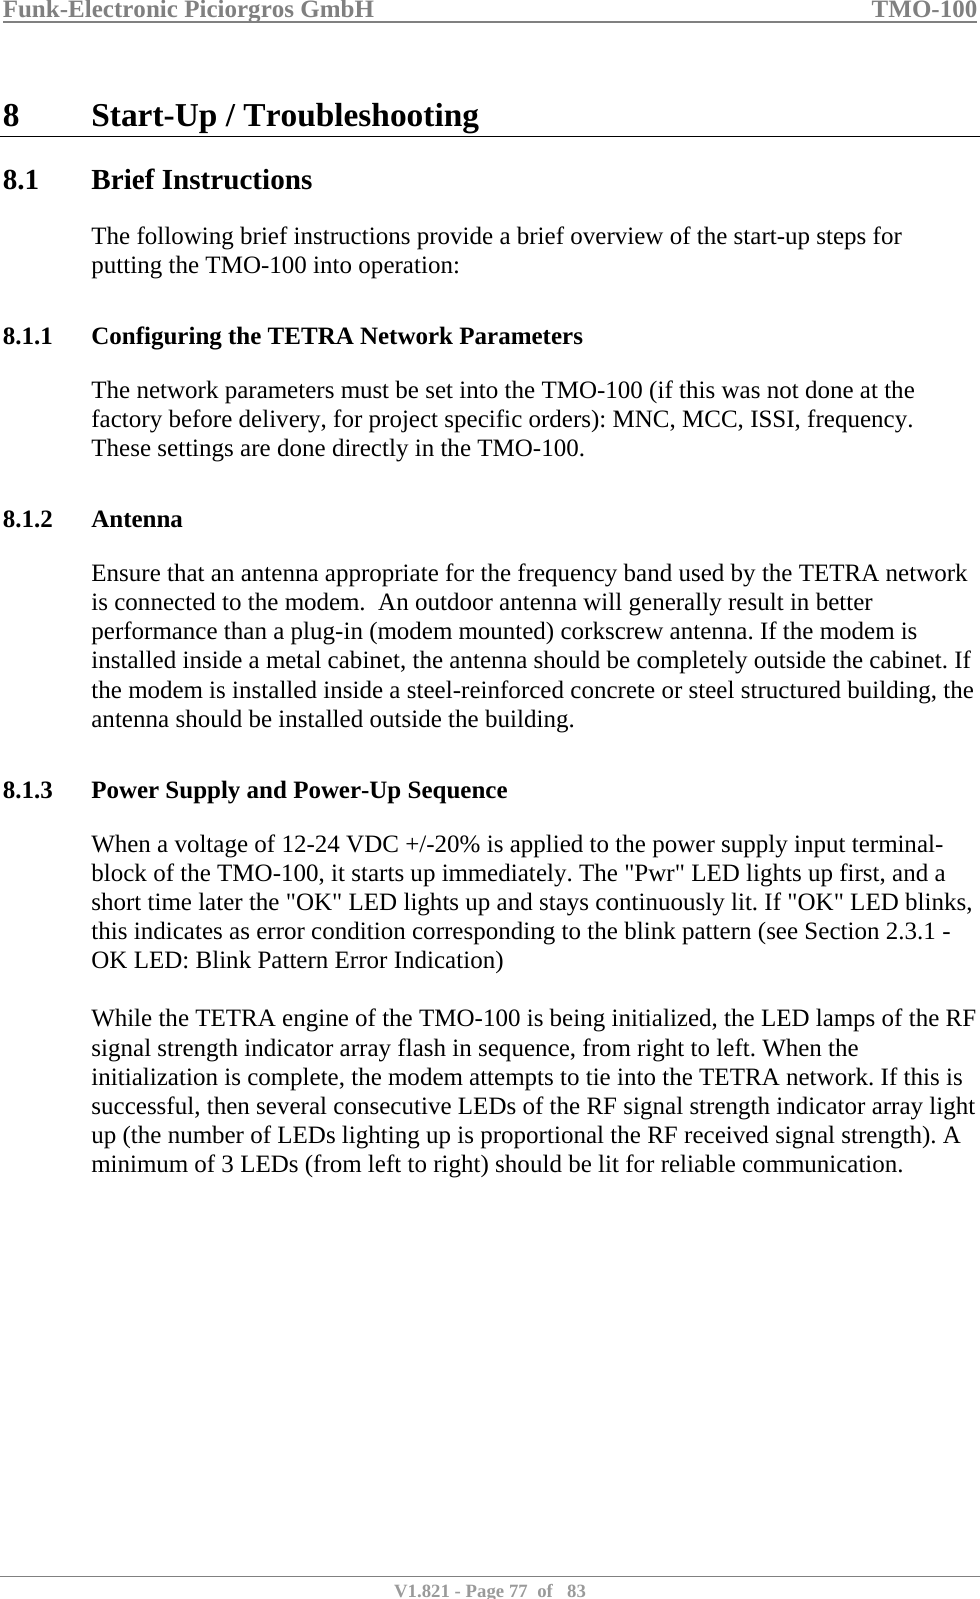 Funk-Electronic Piciorgros GmbH   TMO-100   V1.821 - Page 77  of   83   8 Start-Up / Troubleshooting 8.1 Brief Instructions The following brief instructions provide a brief overview of the start-up steps for putting the TMO-100 into operation:  8.1.1 Configuring the TETRA Network Parameters The network parameters must be set into the TMO-100 (if this was not done at the factory before delivery, for project specific orders): MNC, MCC, ISSI, frequency. These settings are done directly in the TMO-100.  8.1.2 Antenna Ensure that an antenna appropriate for the frequency band used by the TETRA network is connected to the modem.  An outdoor antenna will generally result in better performance than a plug-in (modem mounted) corkscrew antenna. If the modem is installed inside a metal cabinet, the antenna should be completely outside the cabinet. If the modem is installed inside a steel-reinforced concrete or steel structured building, the antenna should be installed outside the building.  8.1.3 Power Supply and Power-Up Sequence When a voltage of 12-24 VDC +/-20% is applied to the power supply input terminal-block of the TMO-100, it starts up immediately. The &quot;Pwr&quot; LED lights up first, and a short time later the &quot;OK&quot; LED lights up and stays continuously lit. If &quot;OK&quot; LED blinks, this indicates as error condition corresponding to the blink pattern (see Section 2.3.1 - OK LED: Blink Pattern Error Indication)  While the TETRA engine of the TMO-100 is being initialized, the LED lamps of the RF signal strength indicator array flash in sequence, from right to left. When the initialization is complete, the modem attempts to tie into the TETRA network. If this is successful, then several consecutive LEDs of the RF signal strength indicator array light up (the number of LEDs lighting up is proportional the RF received signal strength). A minimum of 3 LEDs (from left to right) should be lit for reliable communication.  